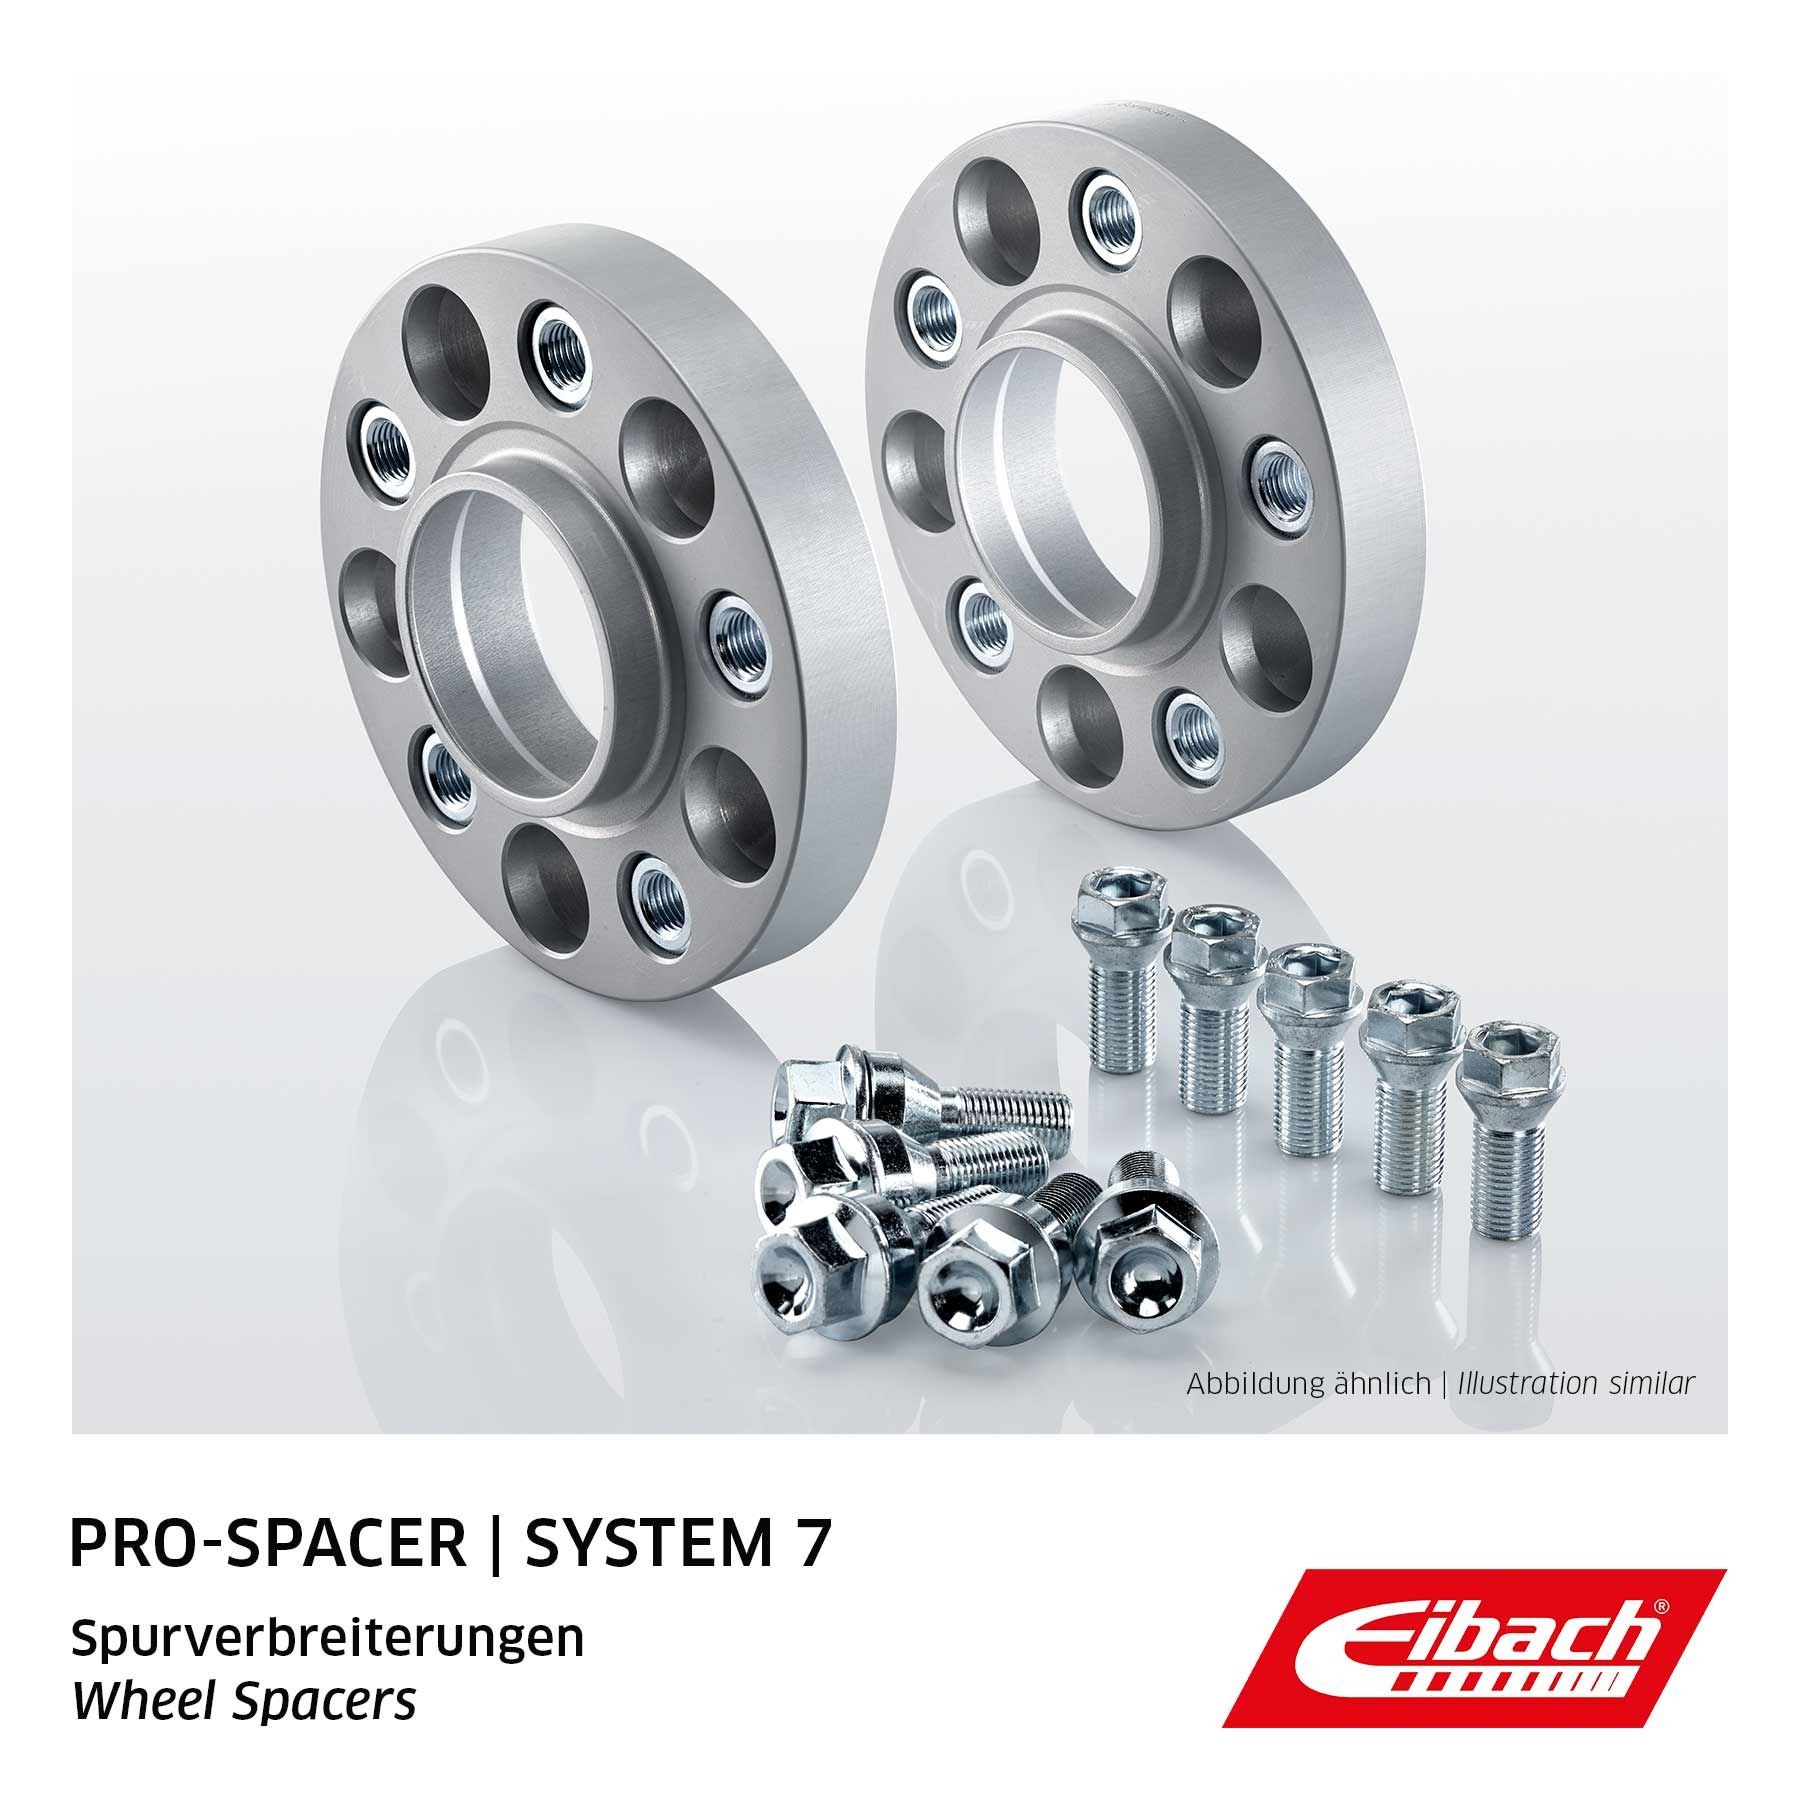 Fiat Wheel spacer EIBACH S90-7-20-034 at a good price